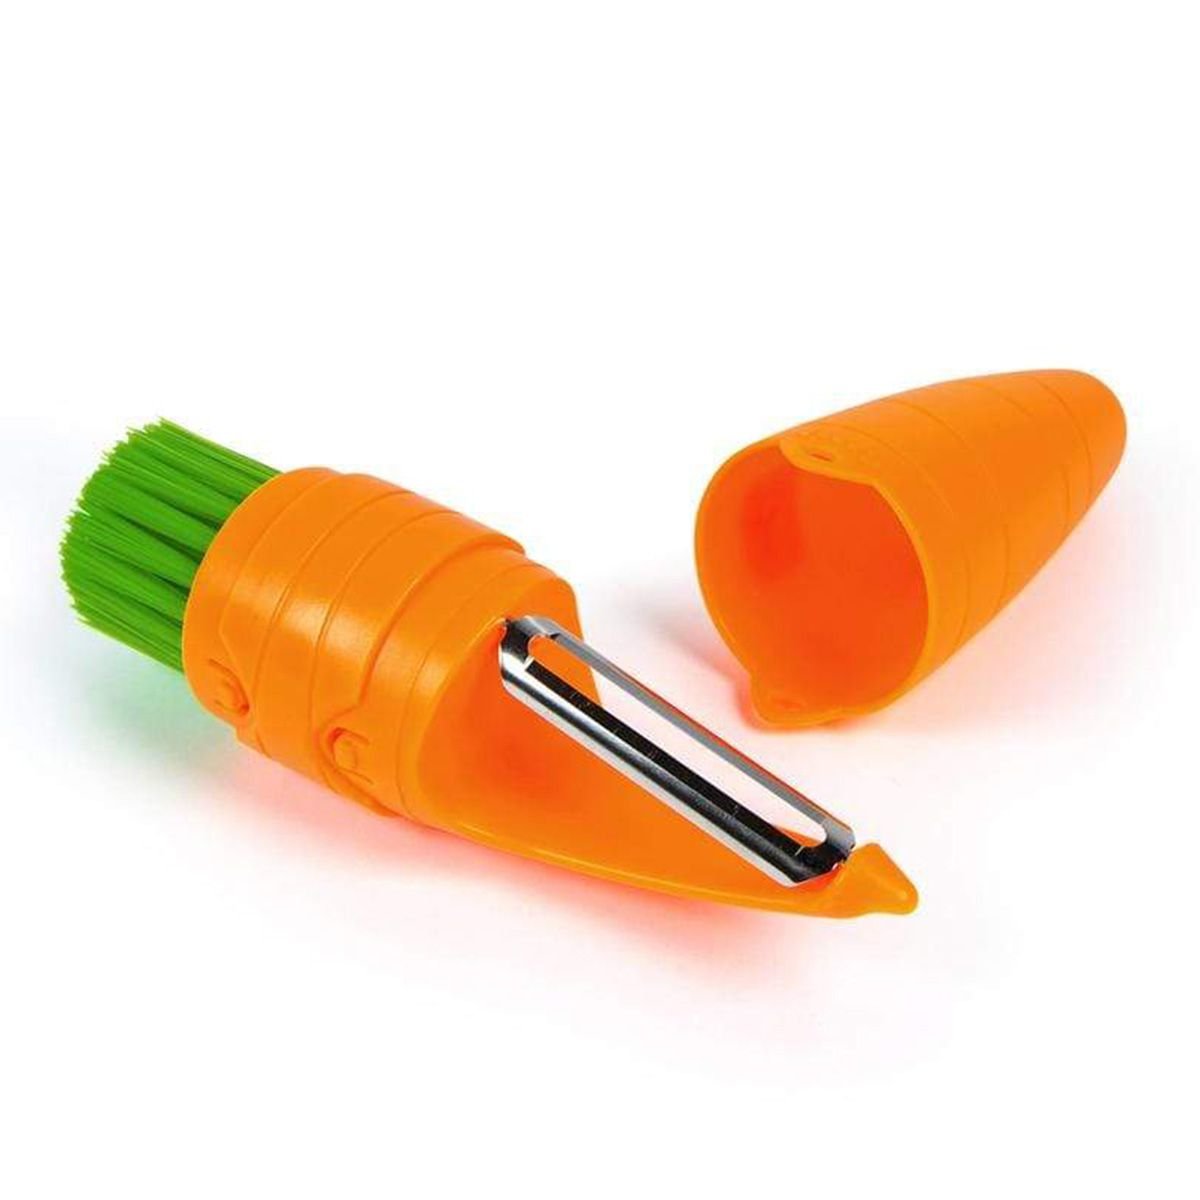 Shop for Bendable Carrot Shape Cleaning Brush Fruit and Vegetable